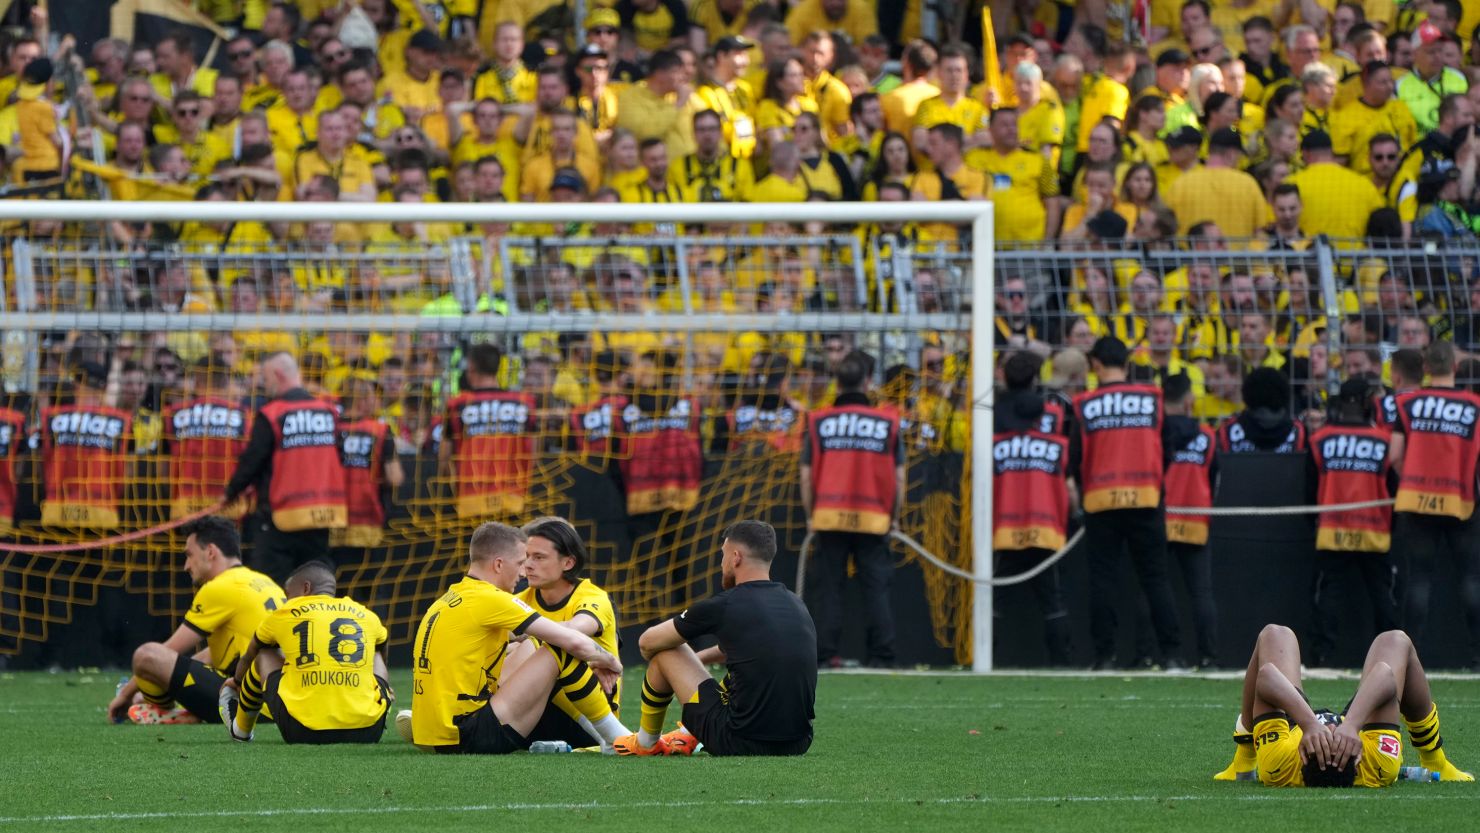 Dortmund's players react after drawing against Mainz.